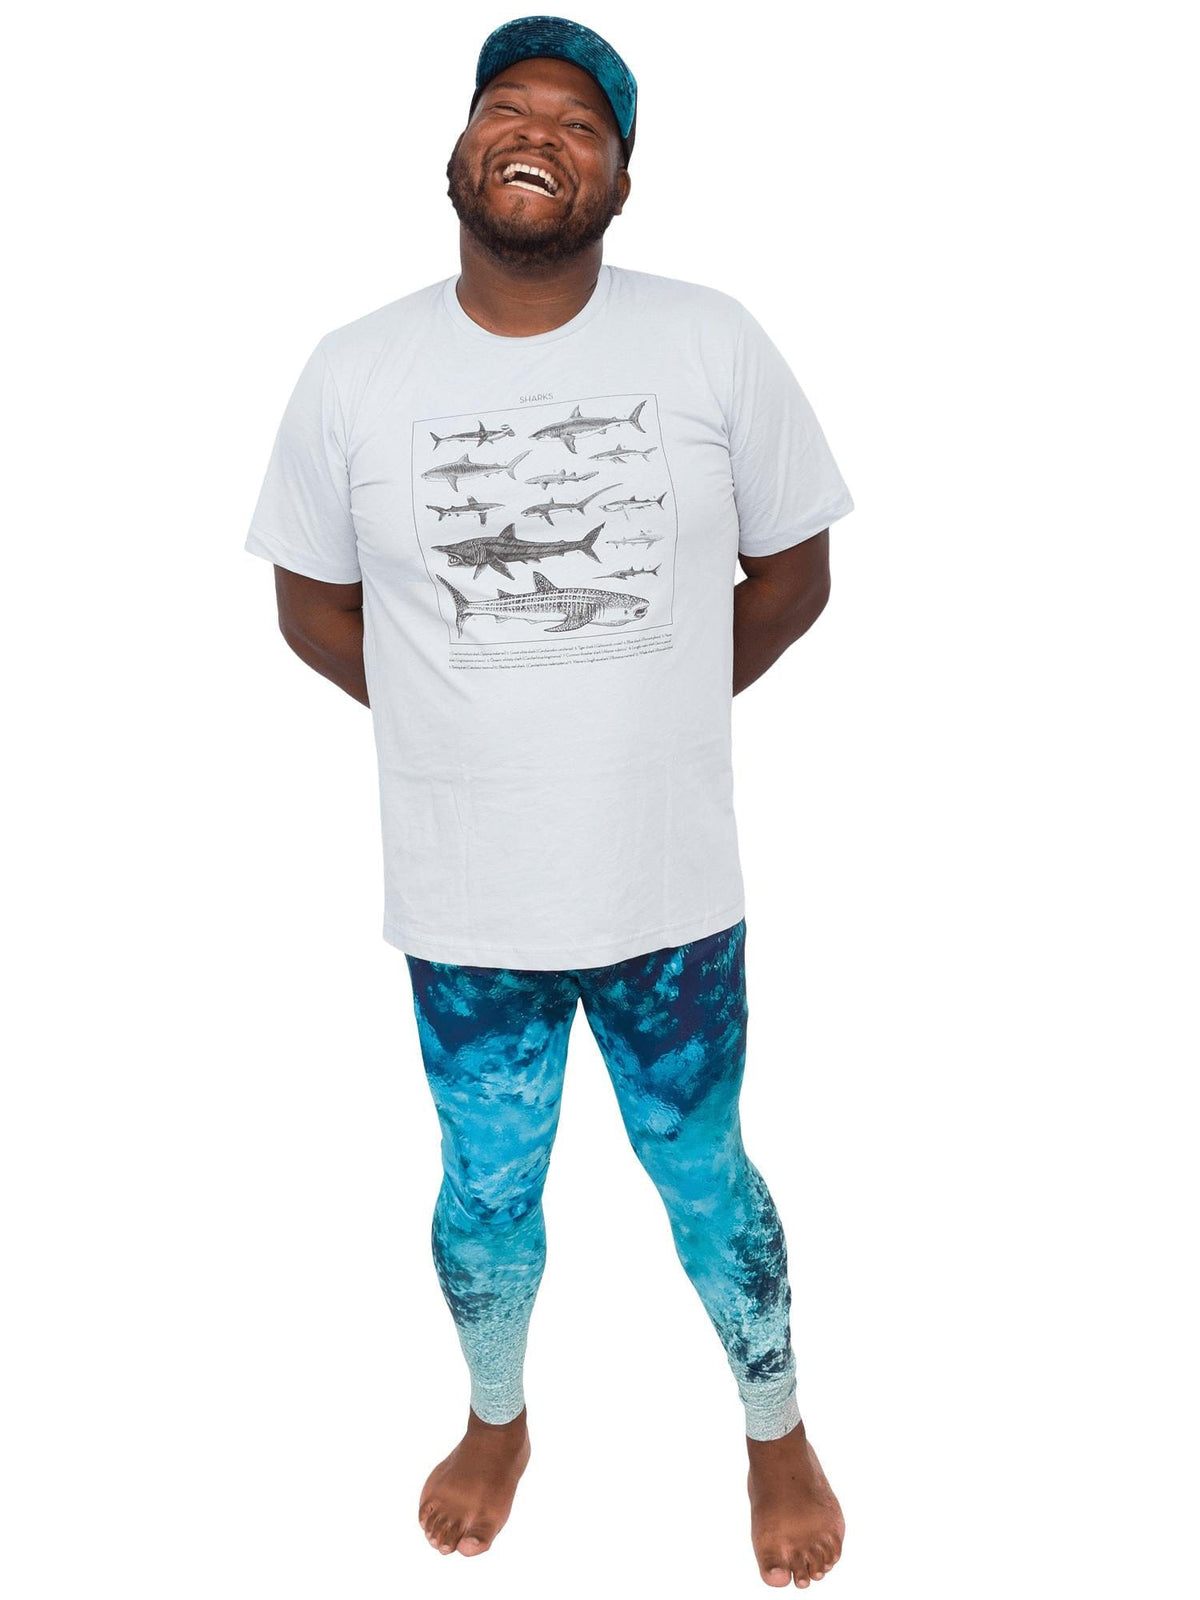 Model: Alex is a fish and wildlife biologist, and science communicator. He is 5’8”, 240 lbs and is wearing a size L legging and XL tee.